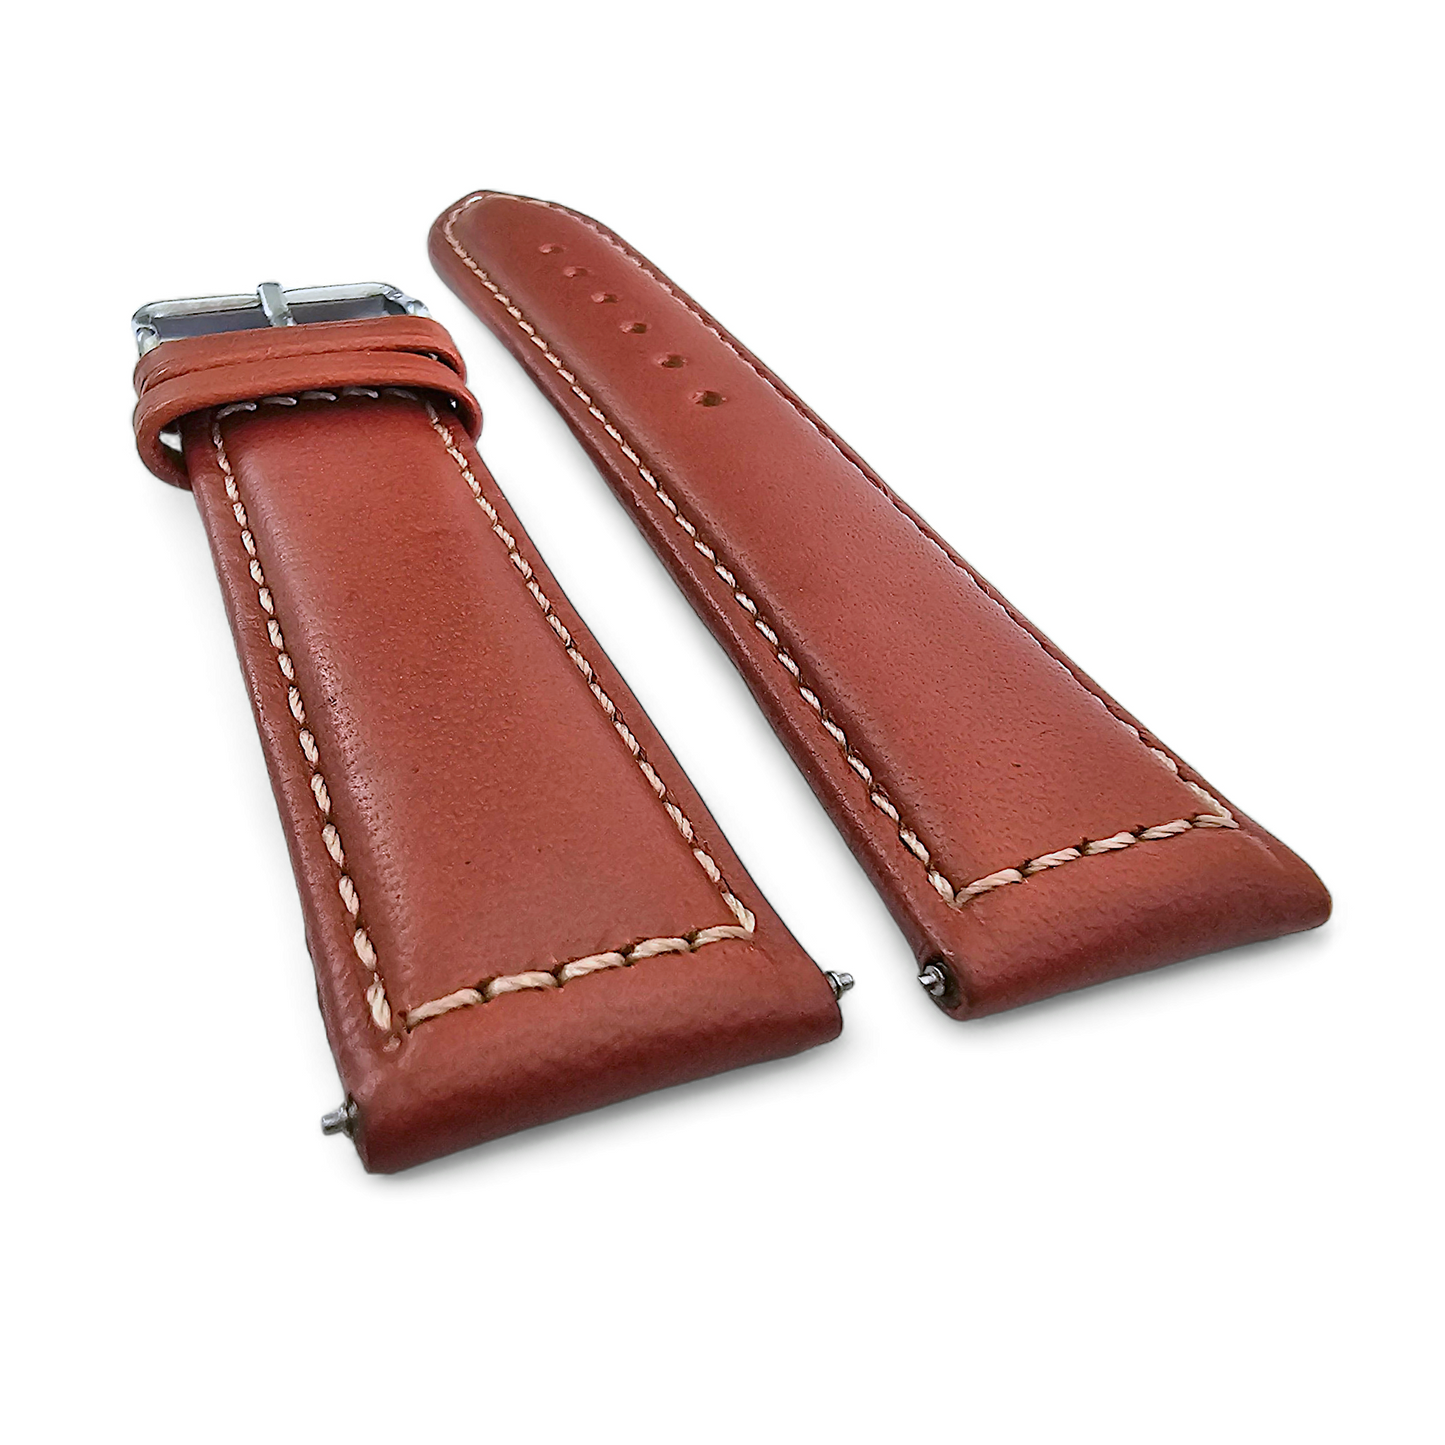 Italian Leather Classic Padded Watch Strap Band 18mm 20mm 22mm Chestnut Brown